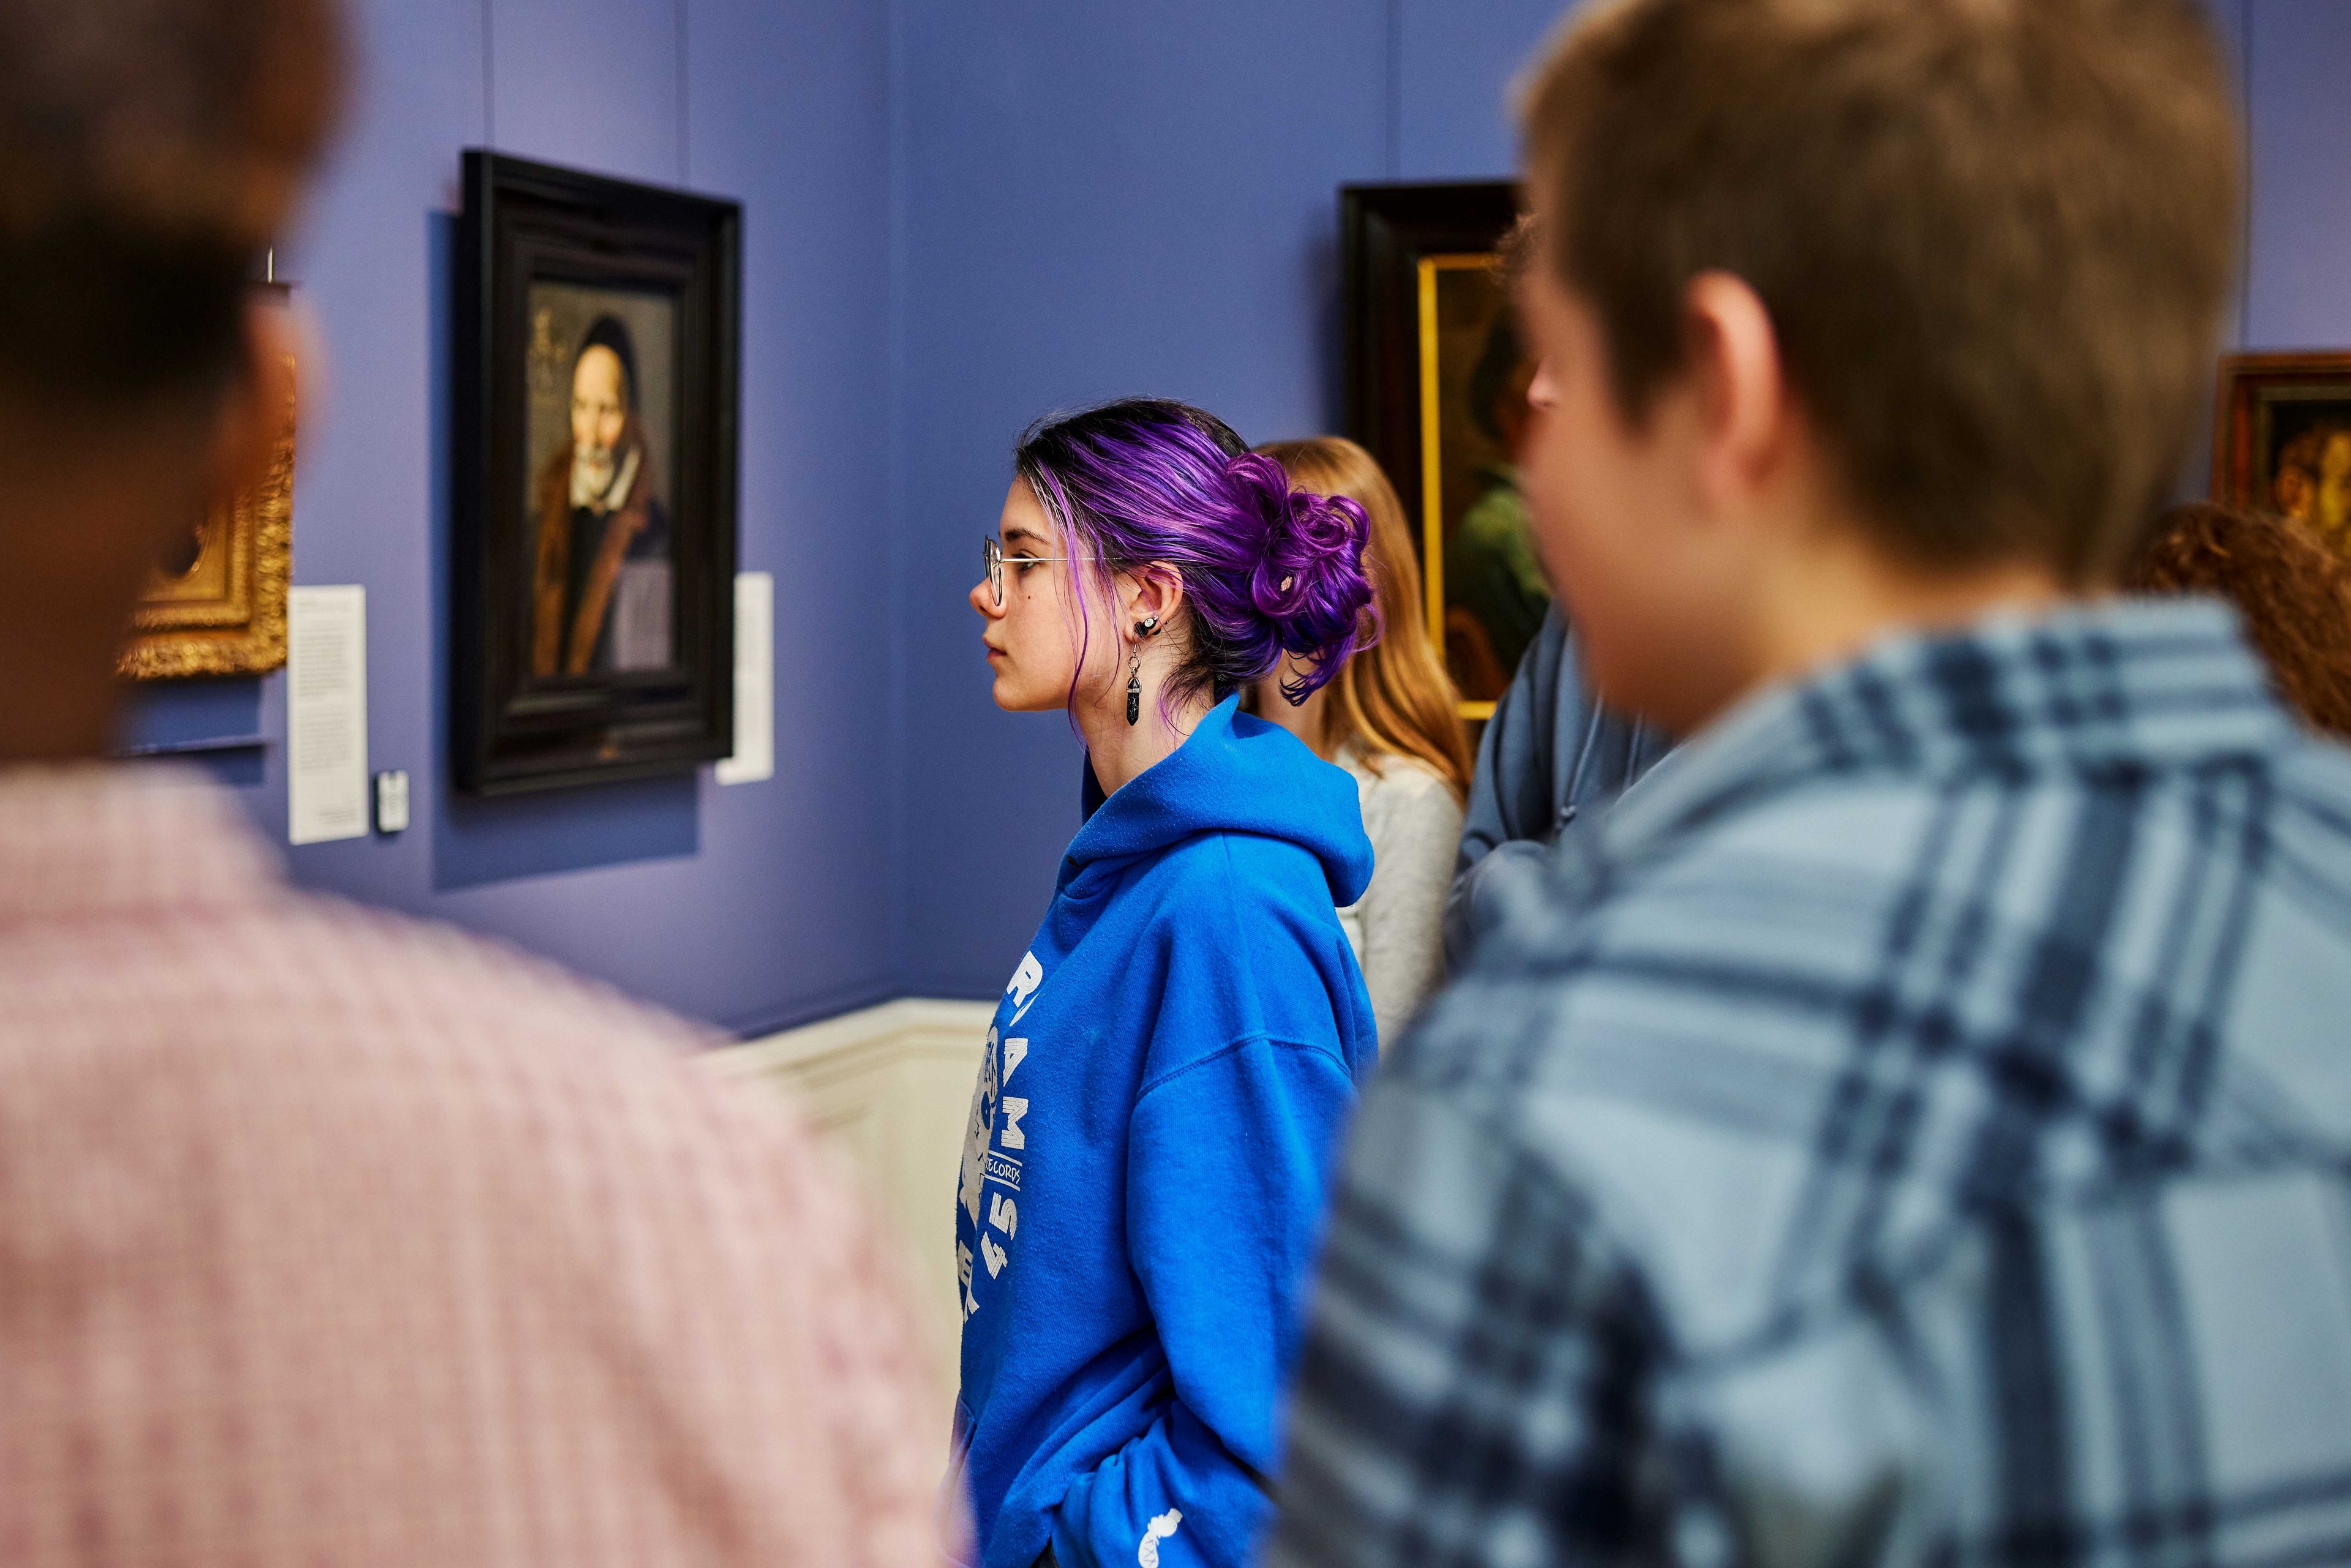 Secondary school pupil and her classmates looking at a painting by Frans Hals. 